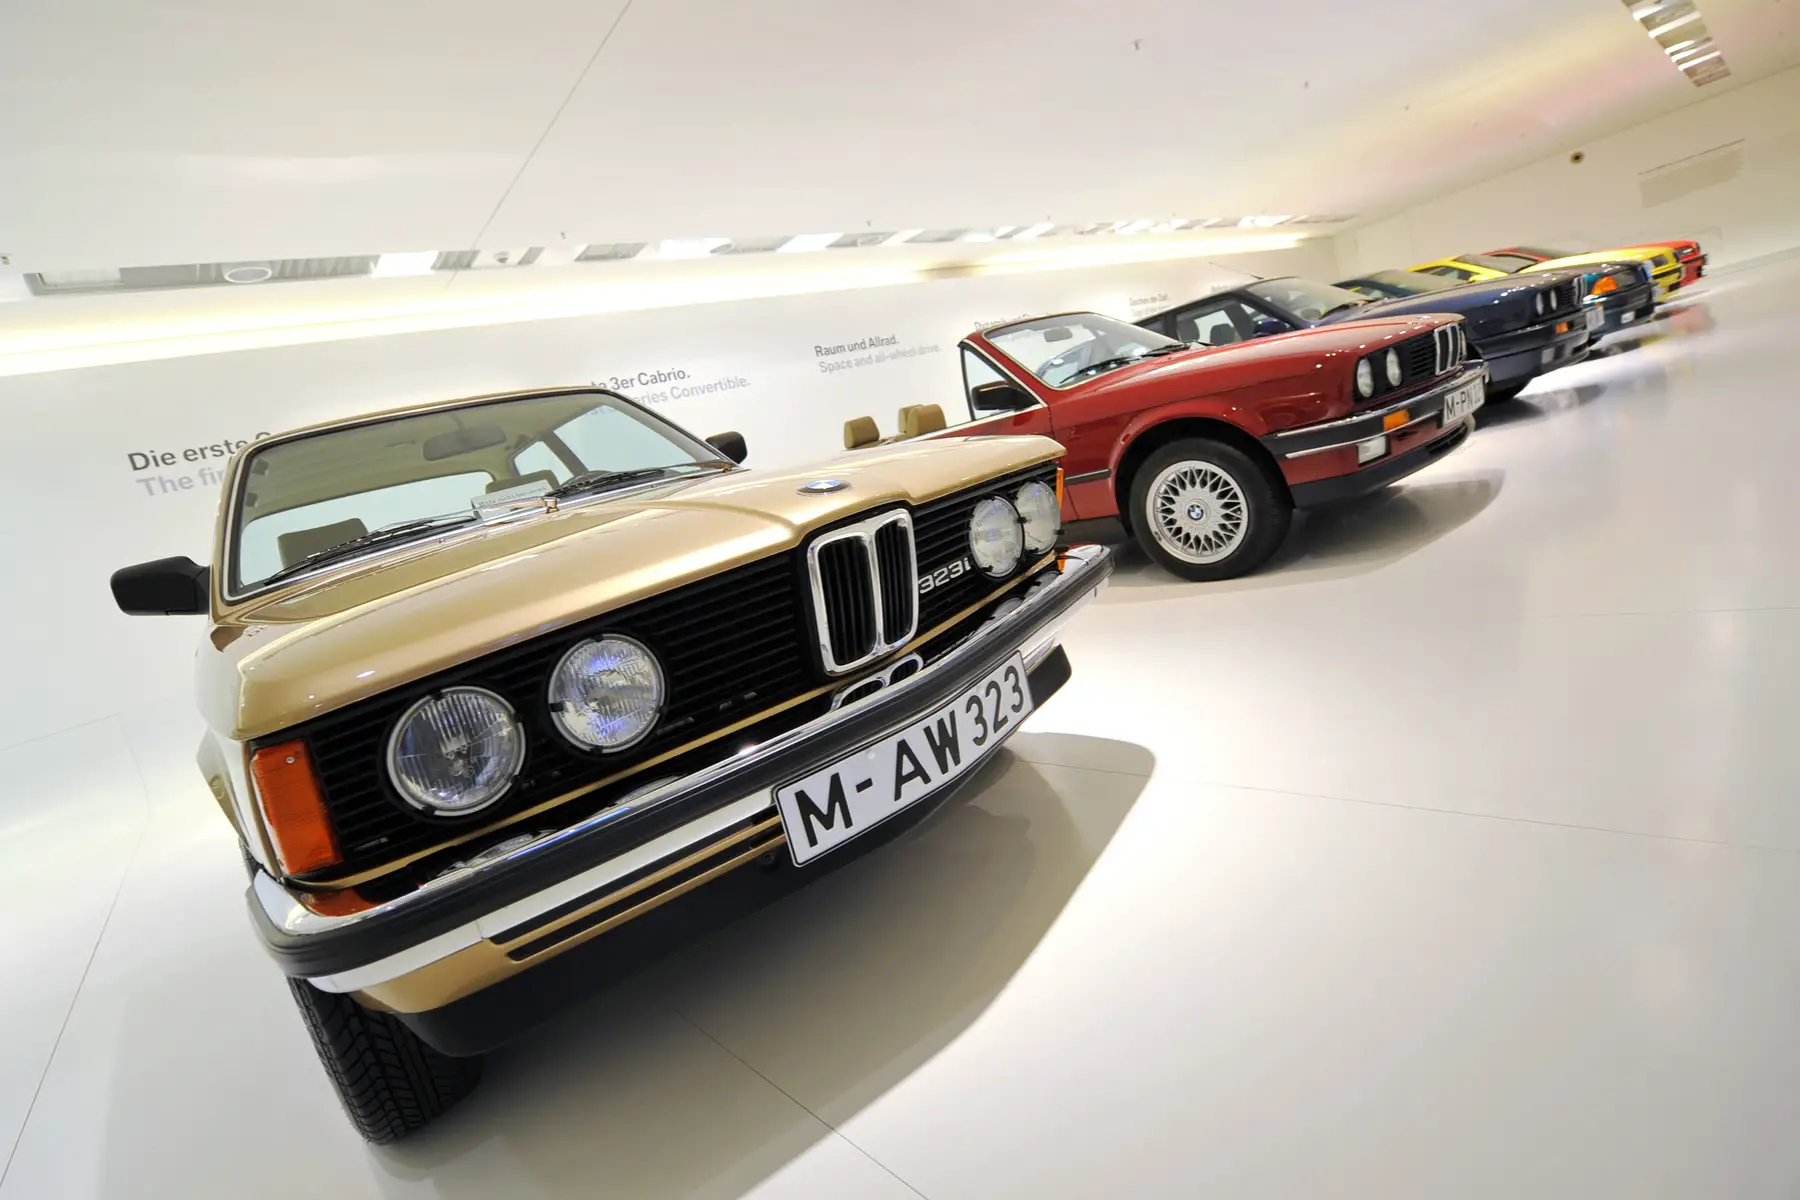 cars at the BMW museum in Munich Germany.